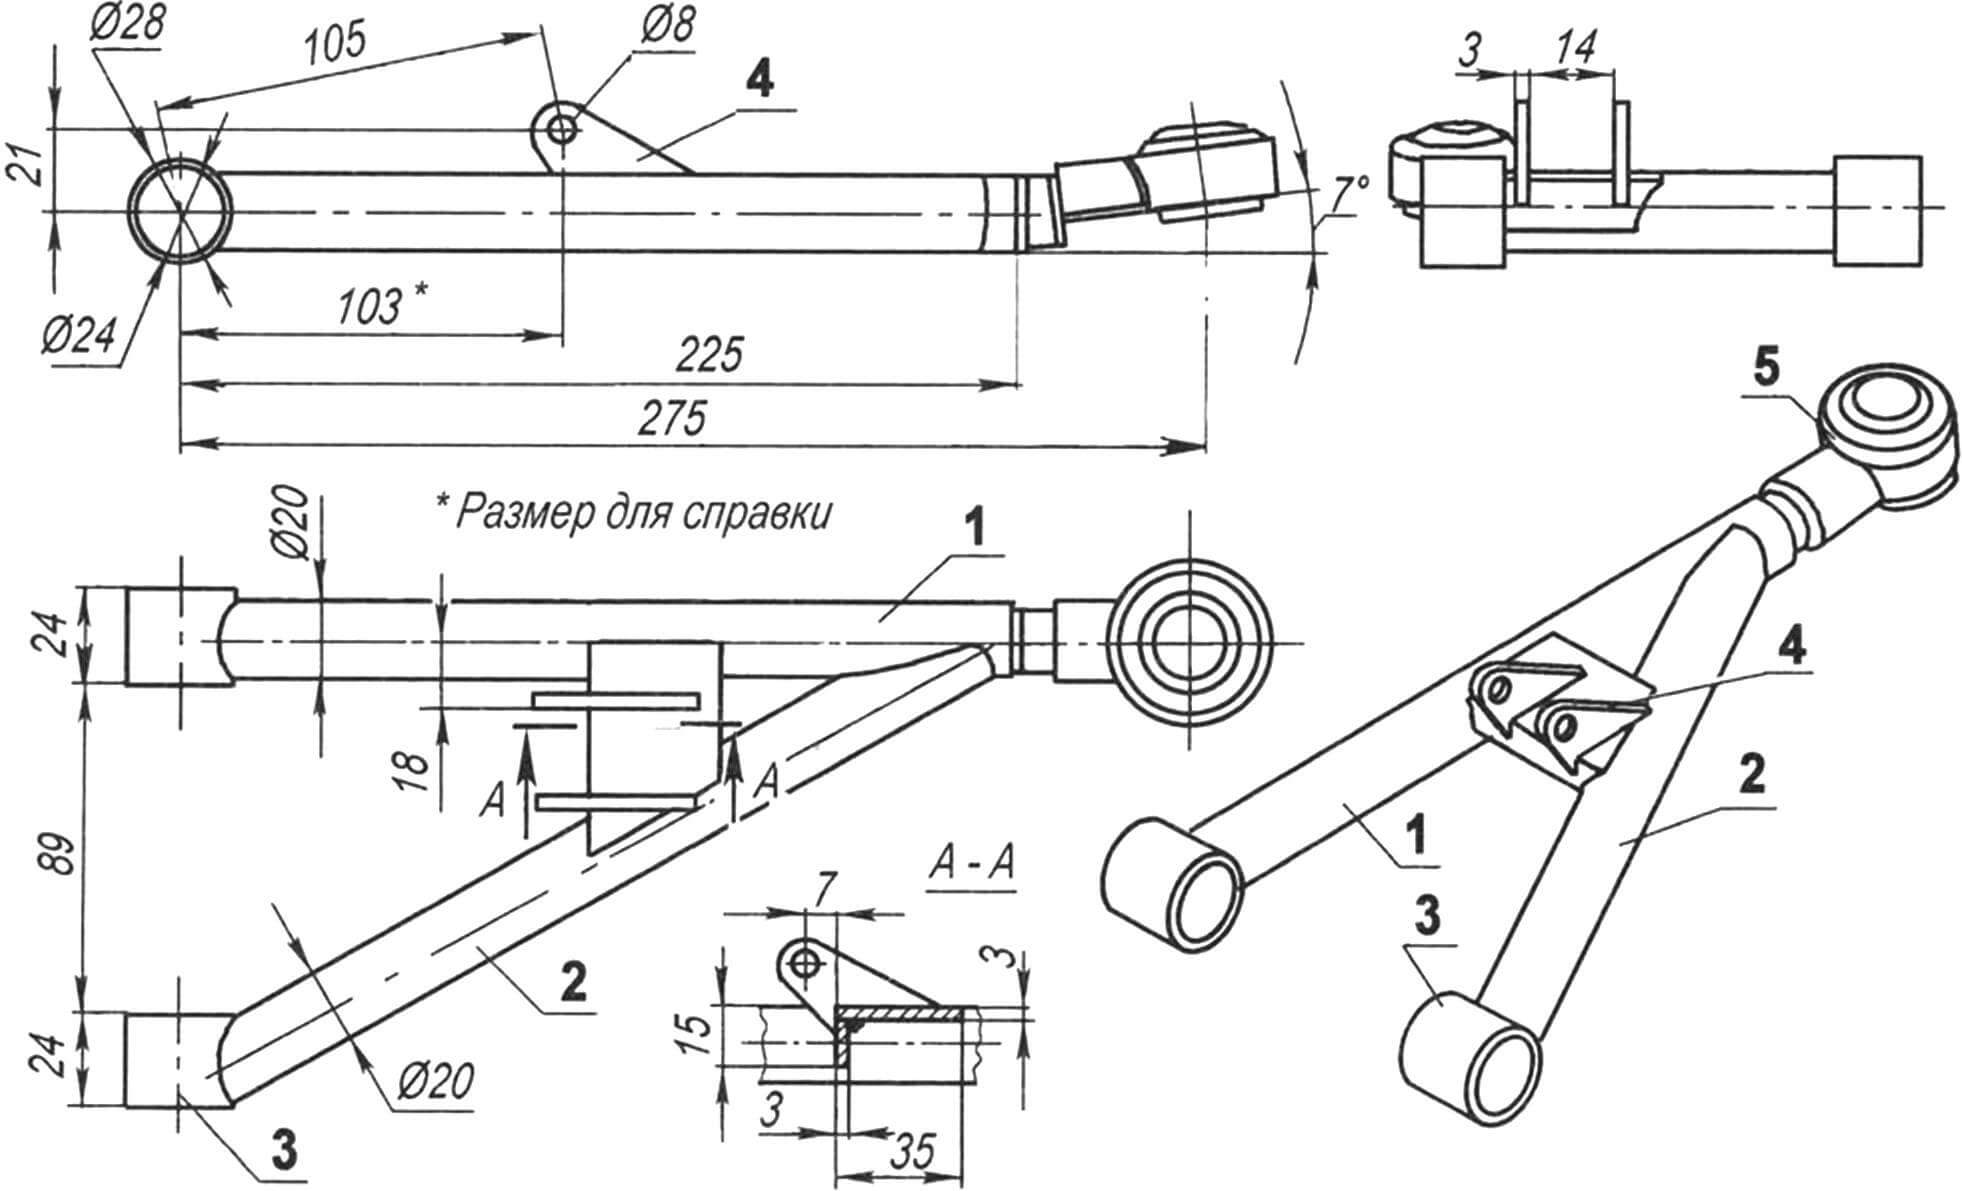 Lower left lever of the front suspension